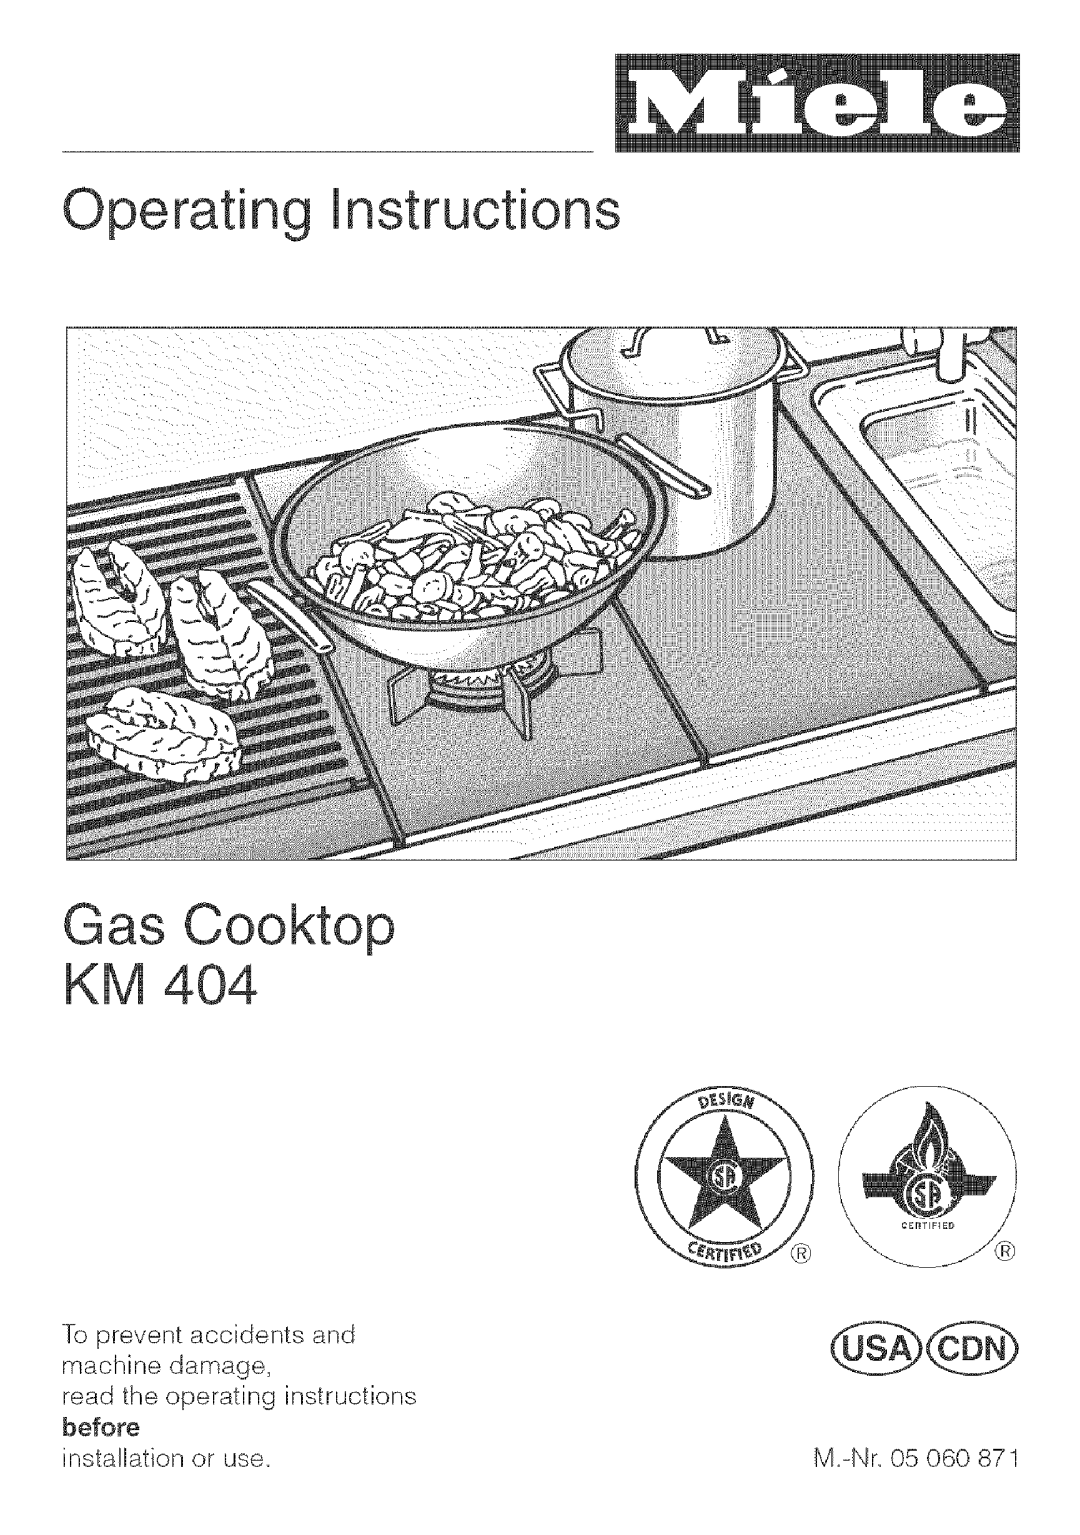 Miele KM 404 manual Operating Instructions Gas Cooktop KM, To prevent accidents and, machine damage, read the operating 